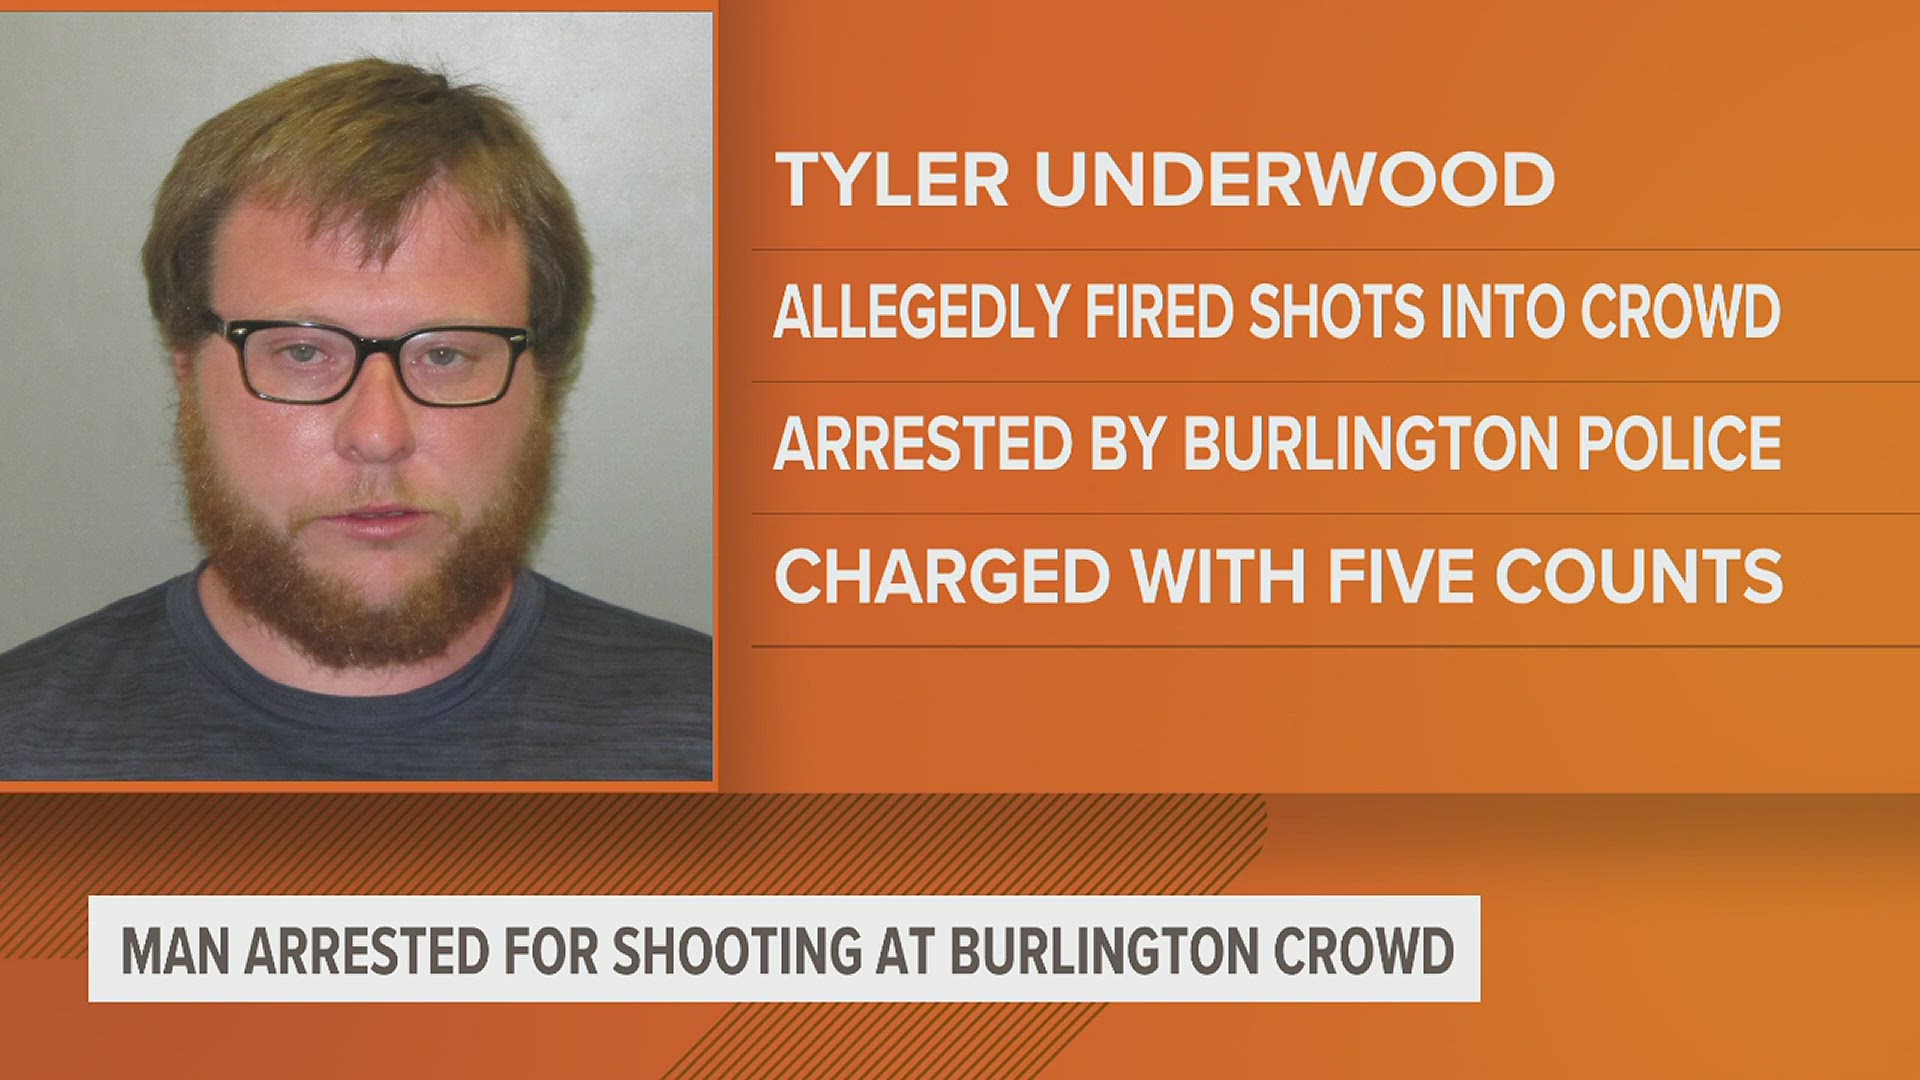 Burlington police say that Tyler Underwood shot into a crowd around 2 a.m. on Sunday morning. He's being charged with 5 counts.